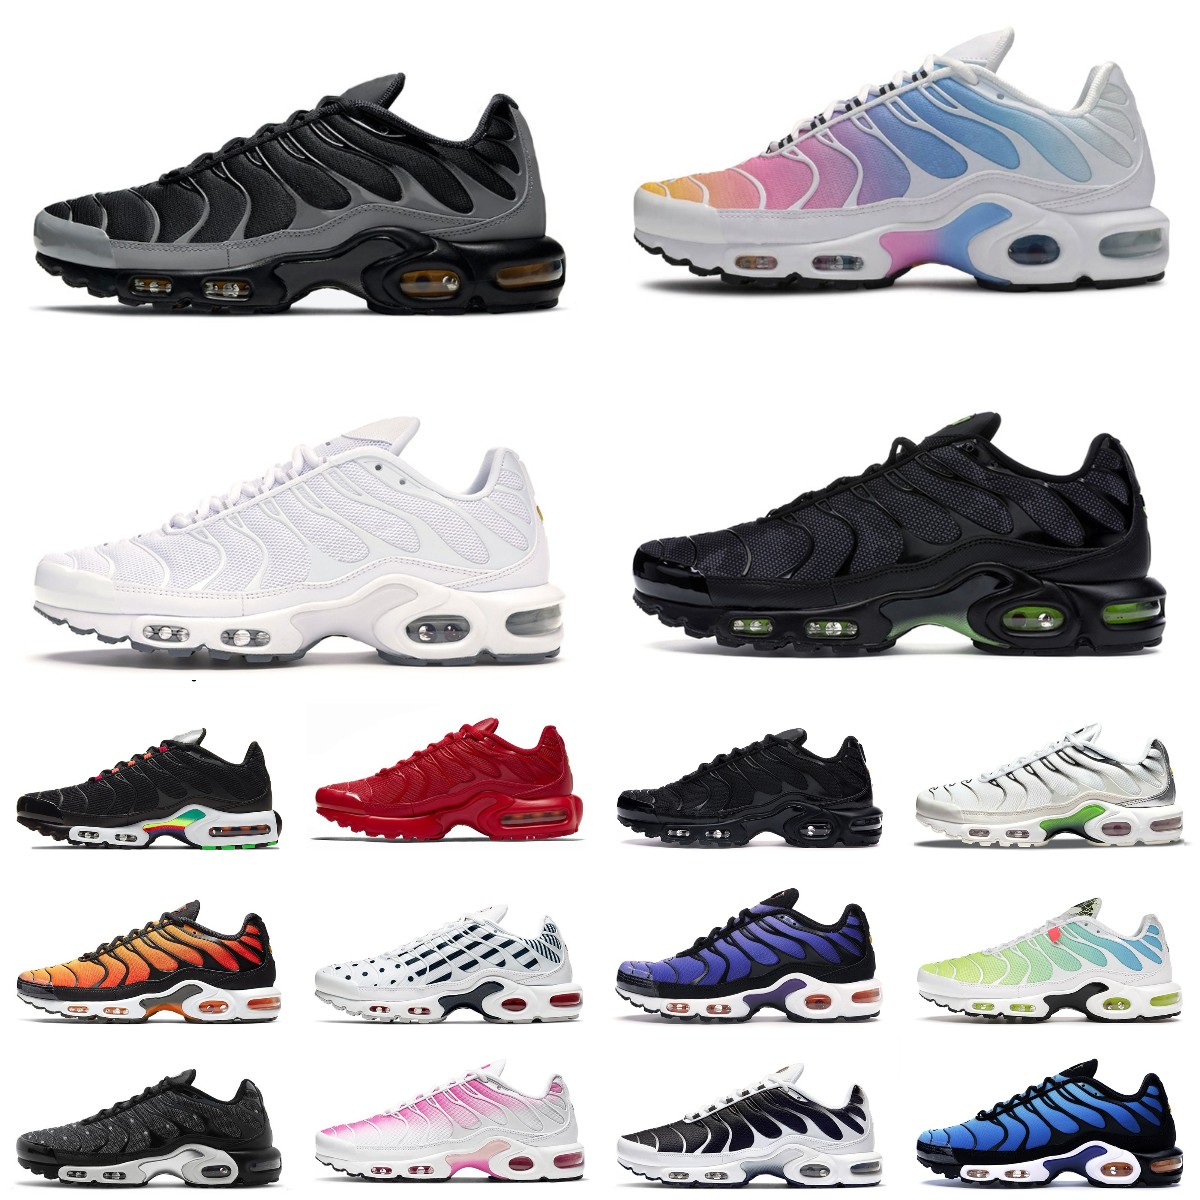 

2023 NEW Tn Plus Running Shoes Tiffany Pink Fade Off Men Women Rainbow Bleached Aqua Blue Fury Hyper Royal Worldwide Oreo Trainers Sneakers With Box, B11 first use 40-46